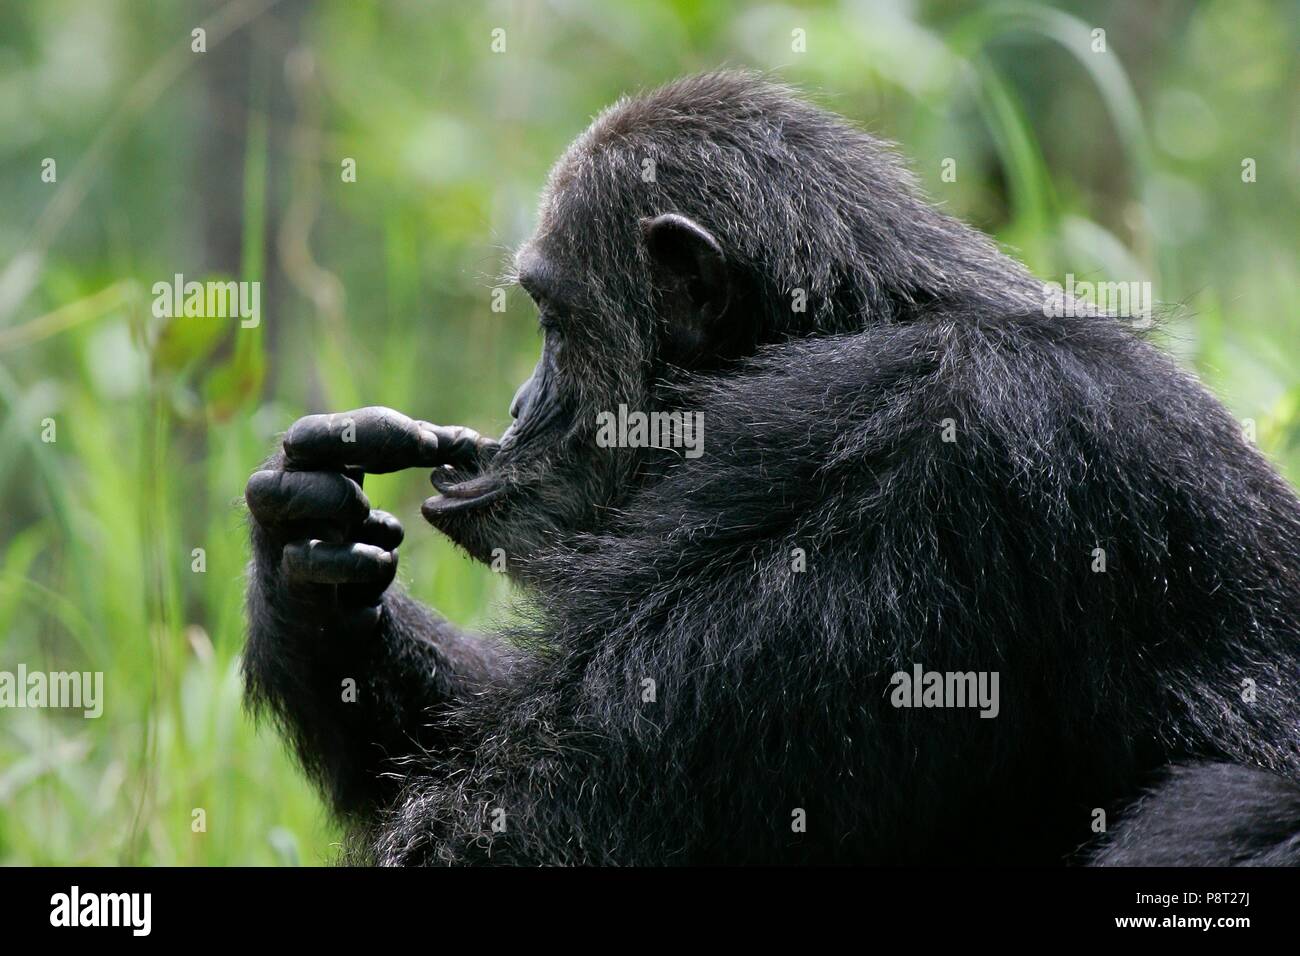 Eastern chimpanzee (Pan troglodytes schweinfurthii) playing with fingers in its face, Gombe Stream National Park, Tanzania | usage worldwide Stock Photo